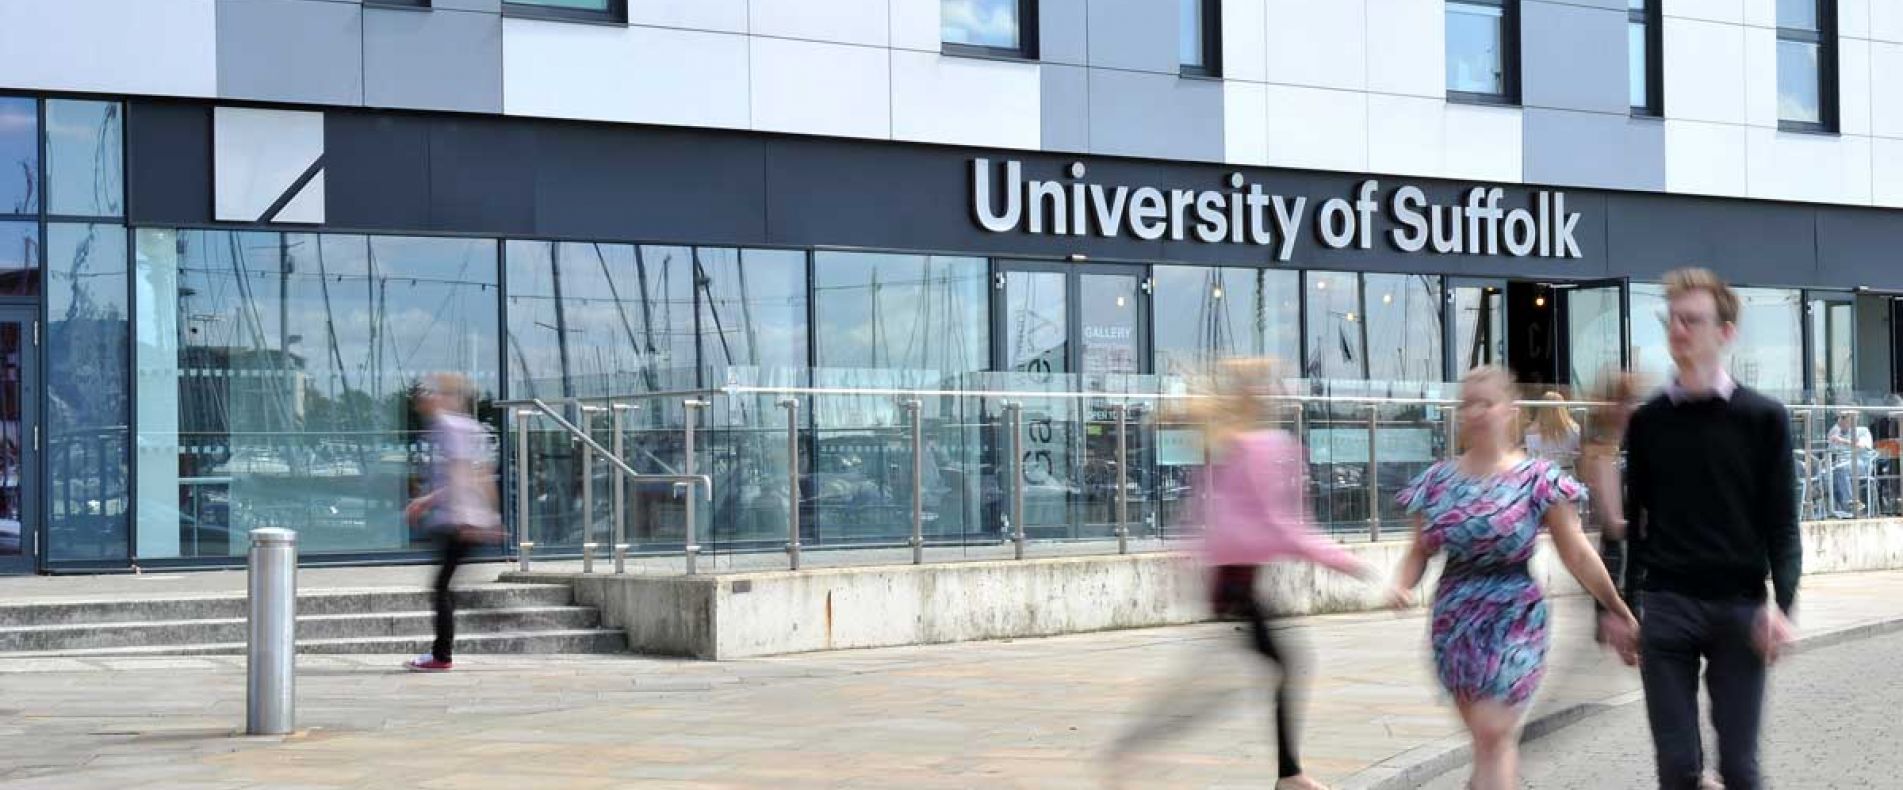 The University of Suffolk in Ipswich was evacuated on March 12 after a suspicious package was found in the post-room